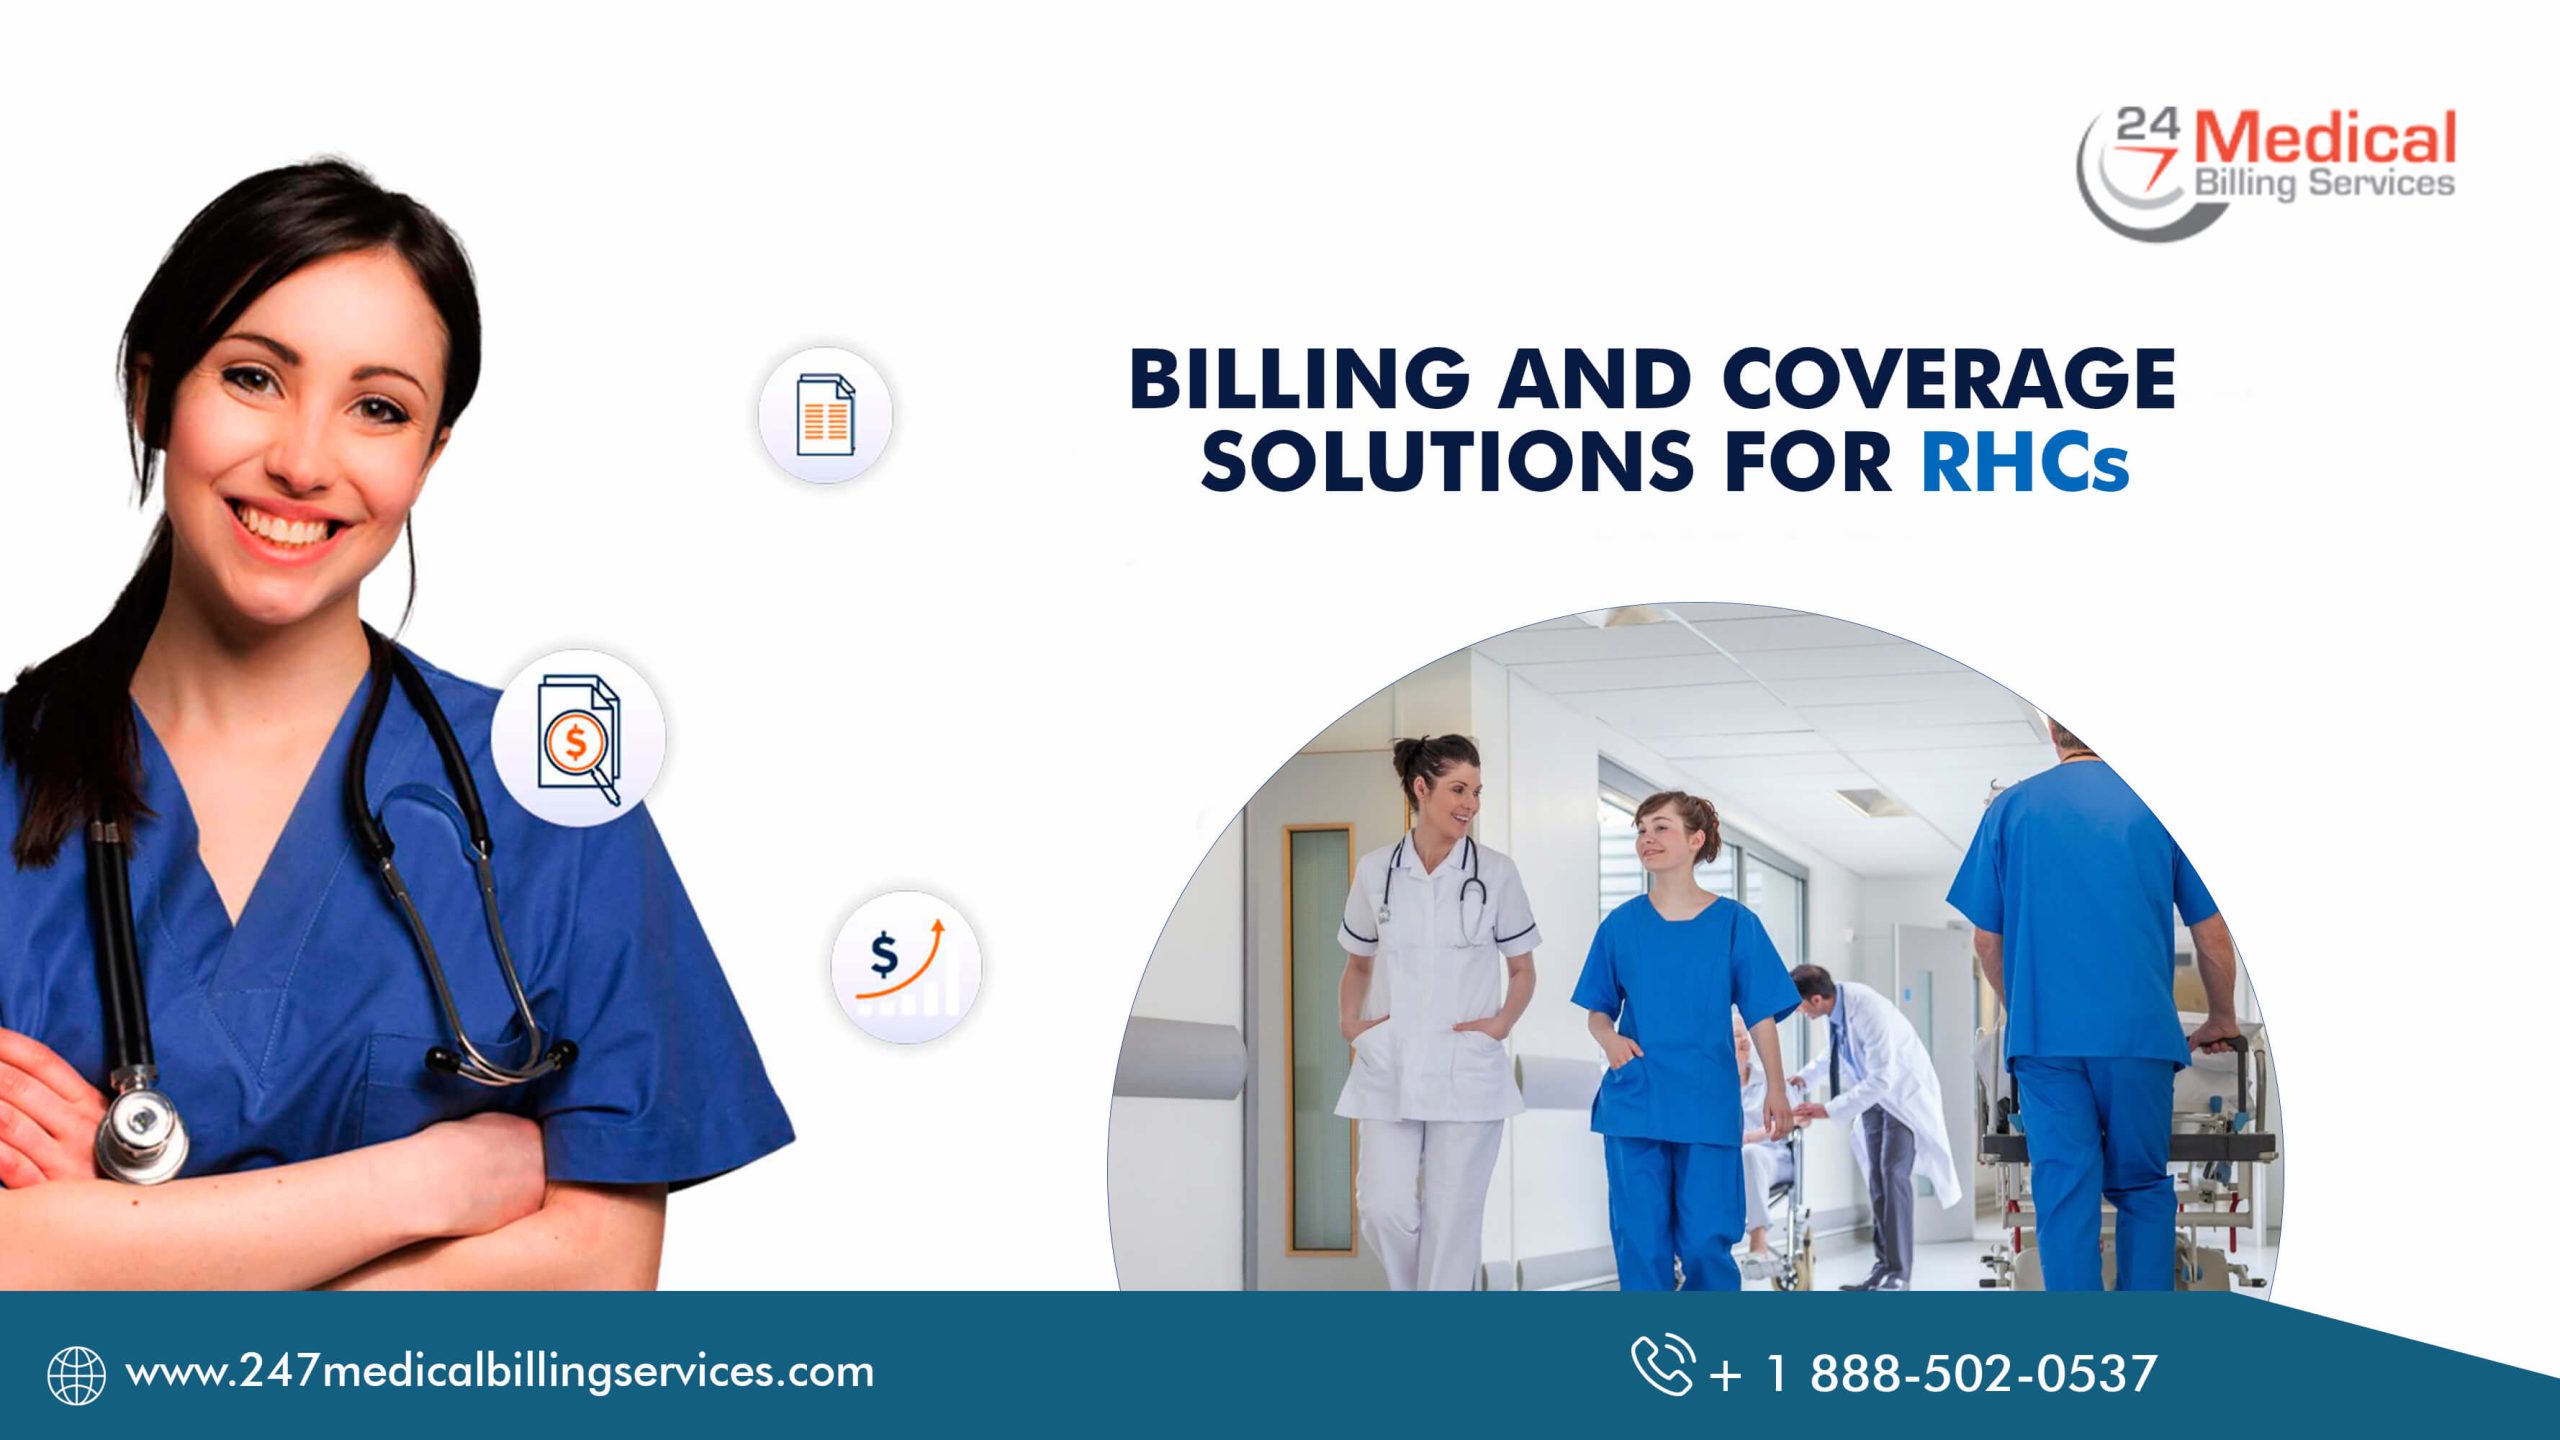  Billing and Coverage Solutions for RHCs